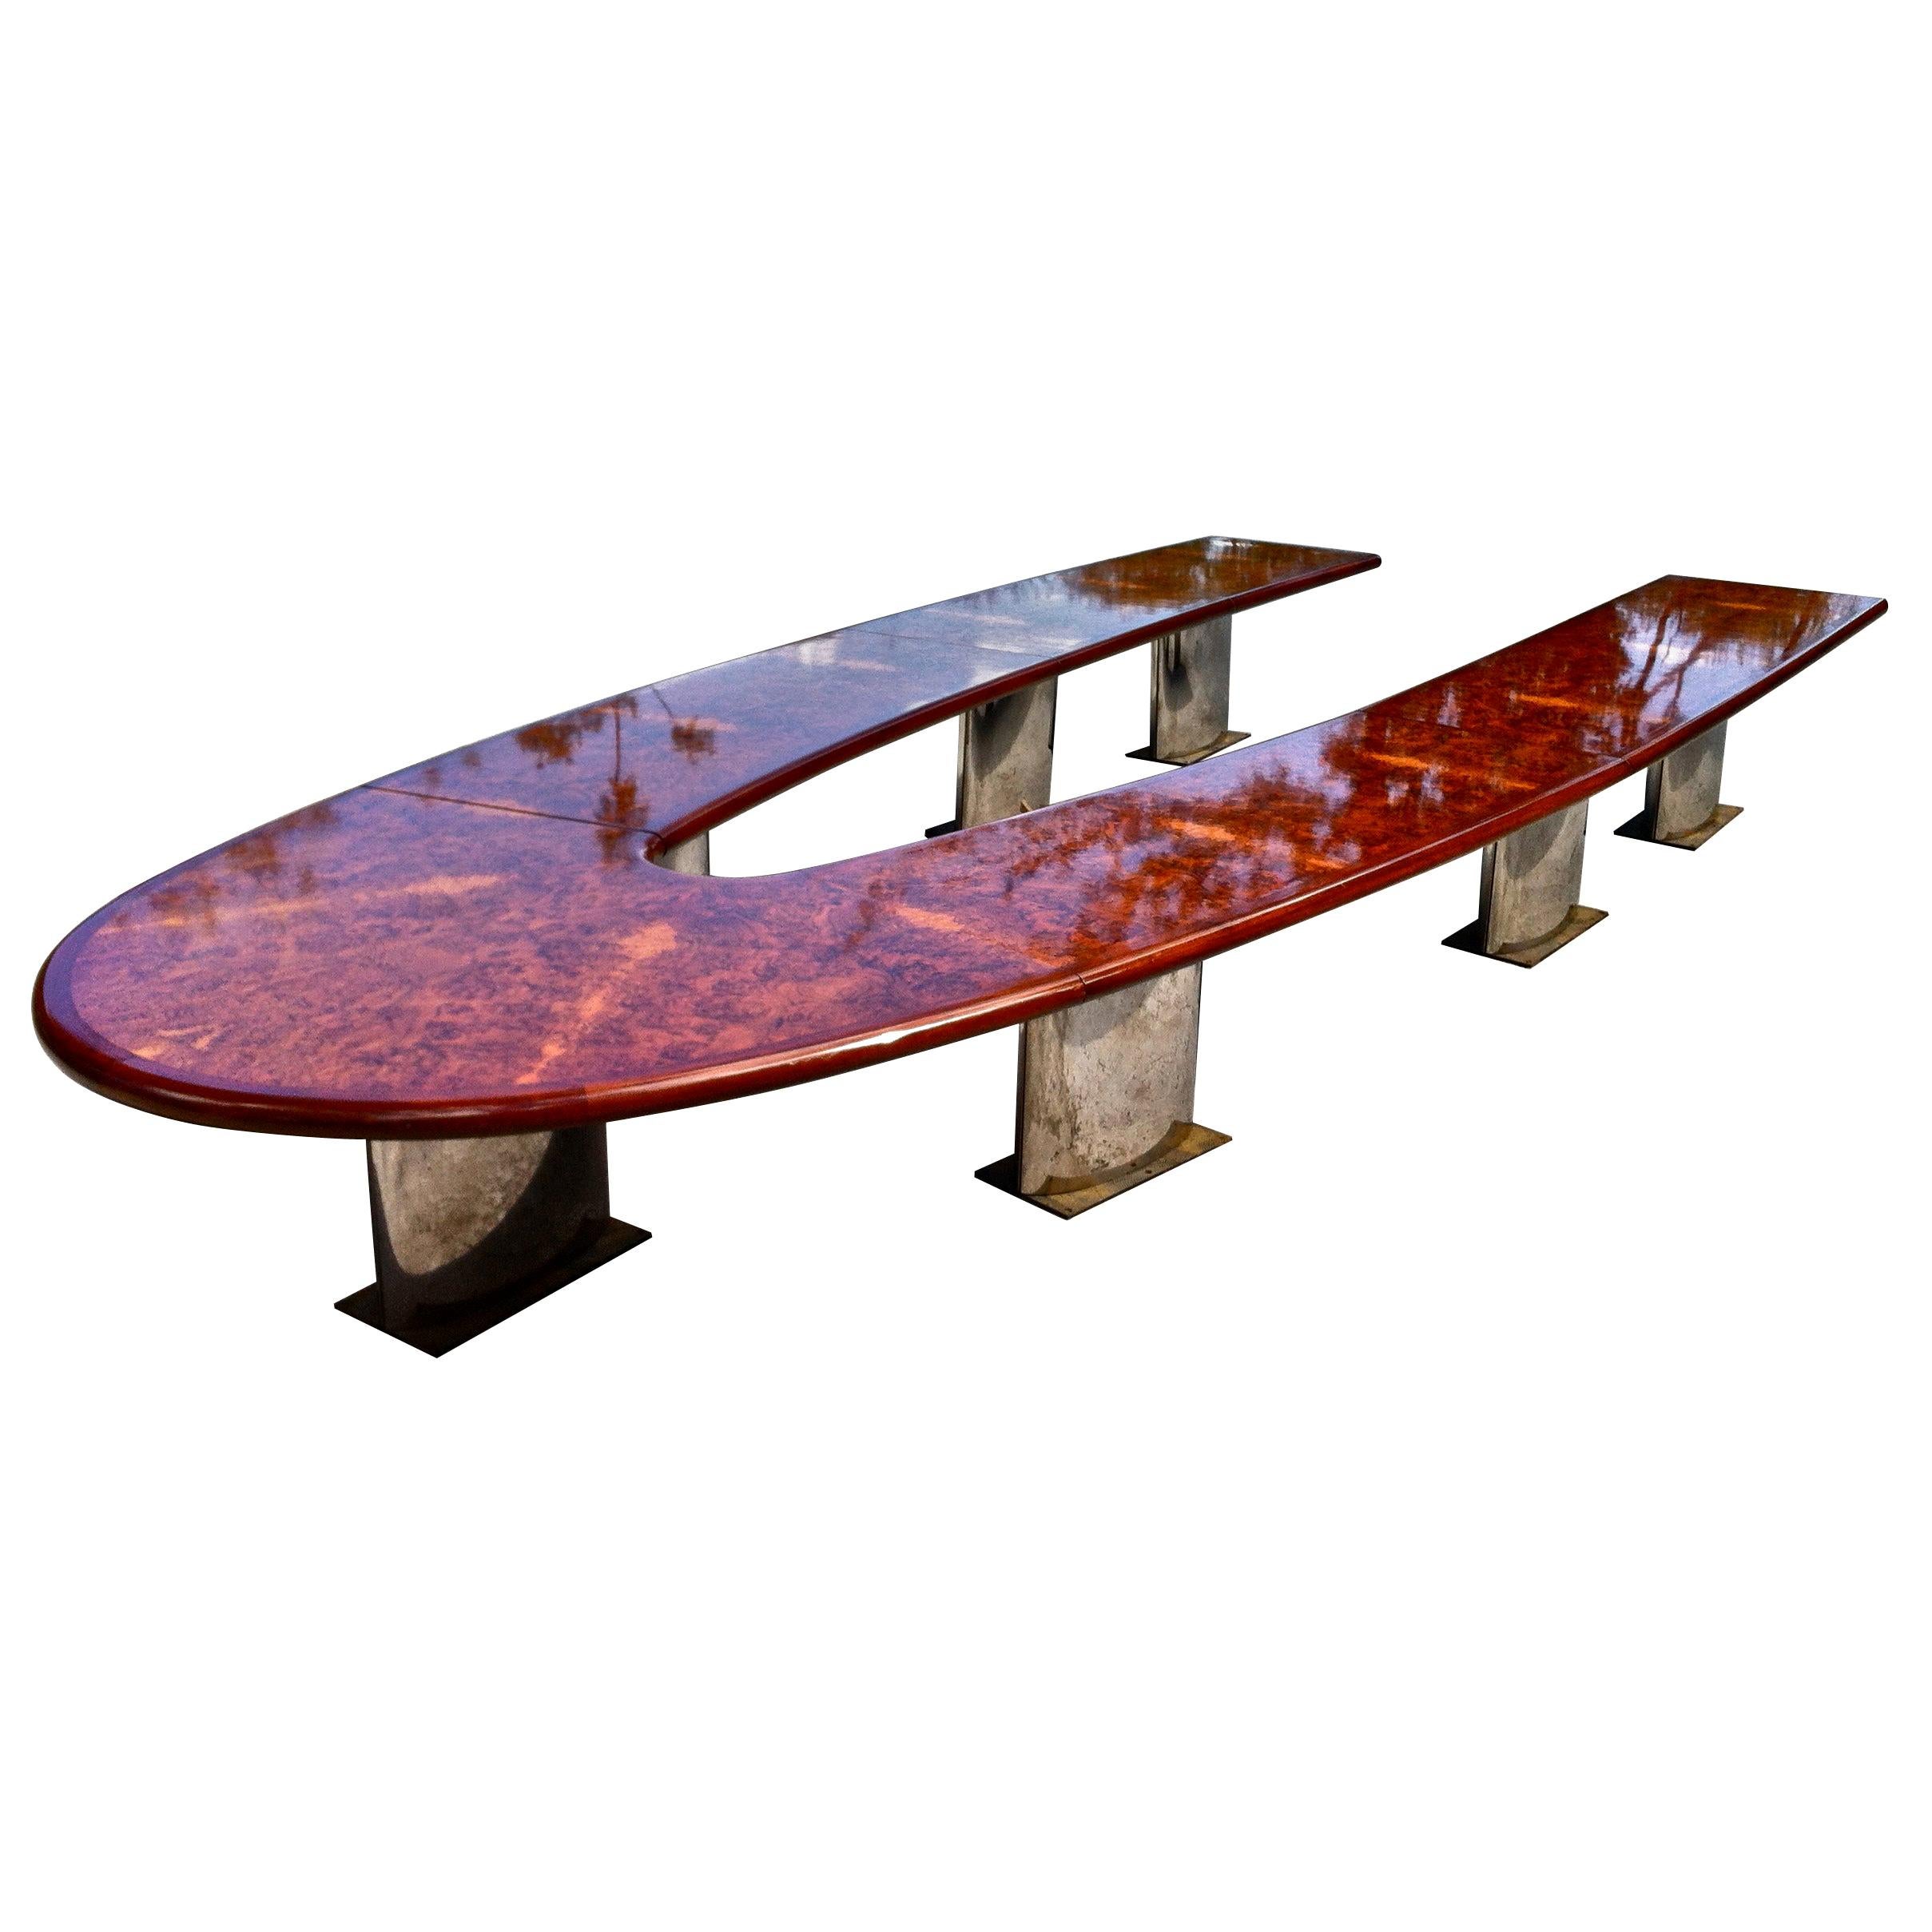 American Mid-Century Modern Conference Table Made for U.S. Steel Corporation